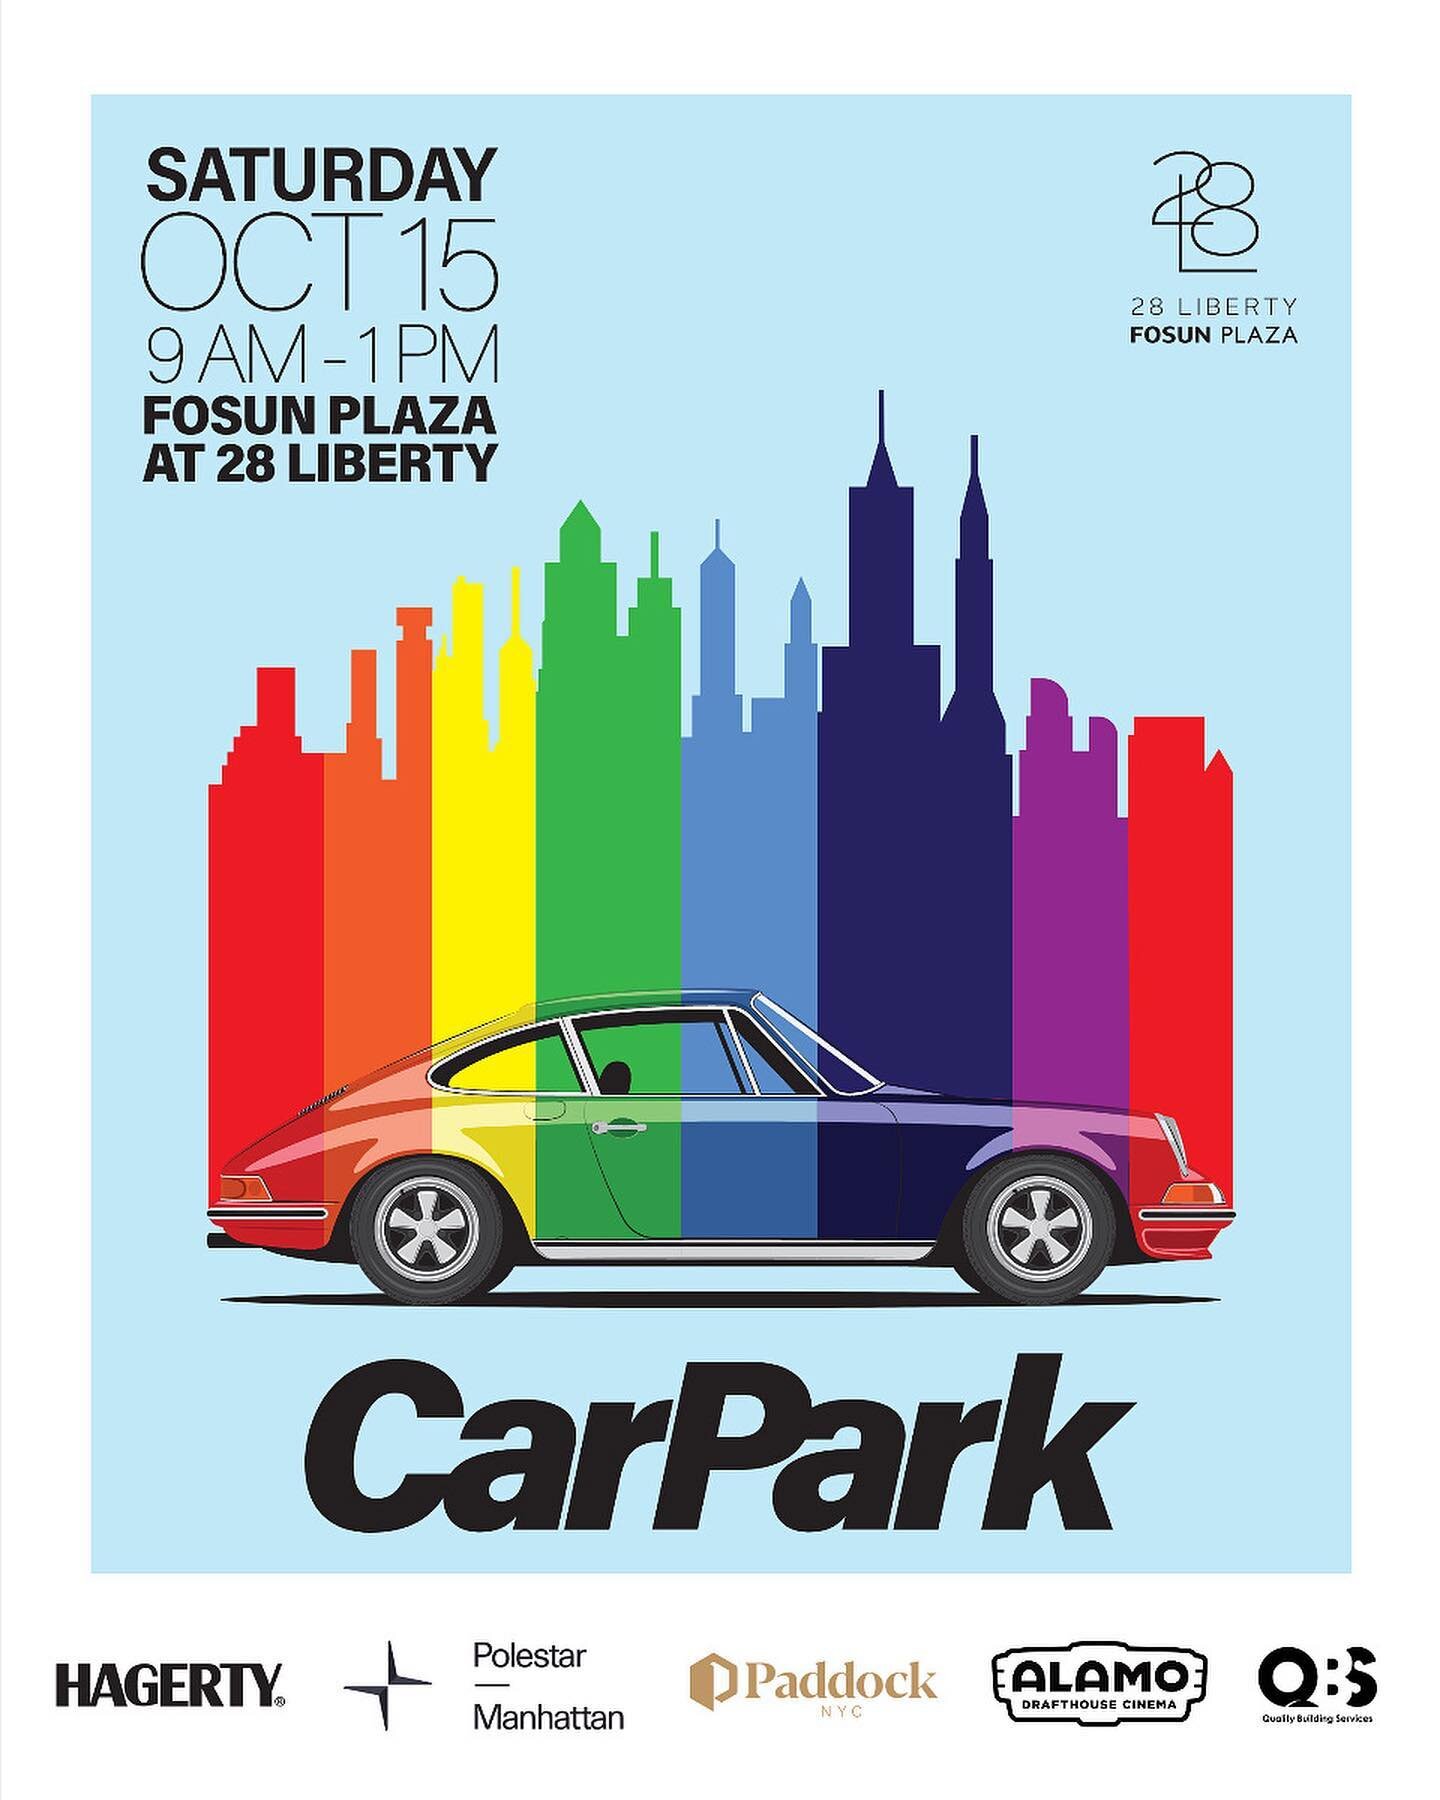 We&rsquo;re thrilled to announce the second edition of CarPark Fosun Plaza at 28 Liberty.  On Saturday, October 15, from 9 AM to 1 PM, join us on the elevated plaza in downtown NYC at the intersection of Liberty and Nassau for a curated exhibition of